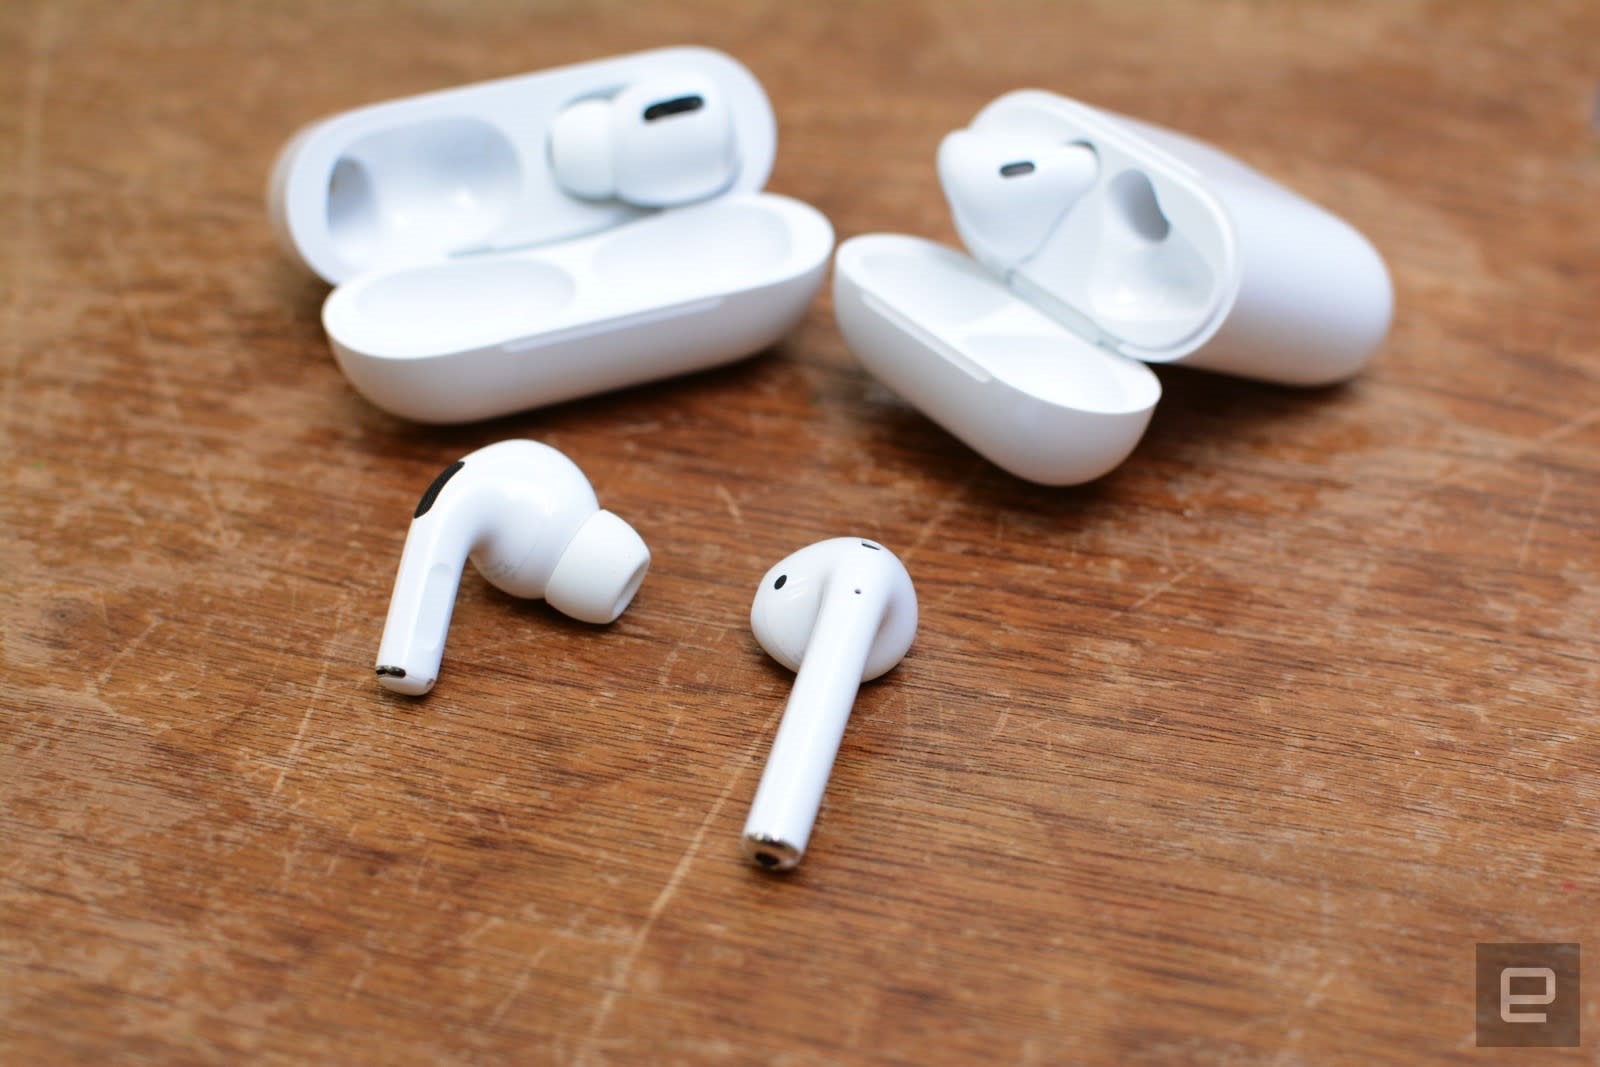 Apple's AirPods Pro are back on sale for $200 | DeviceDaily.com